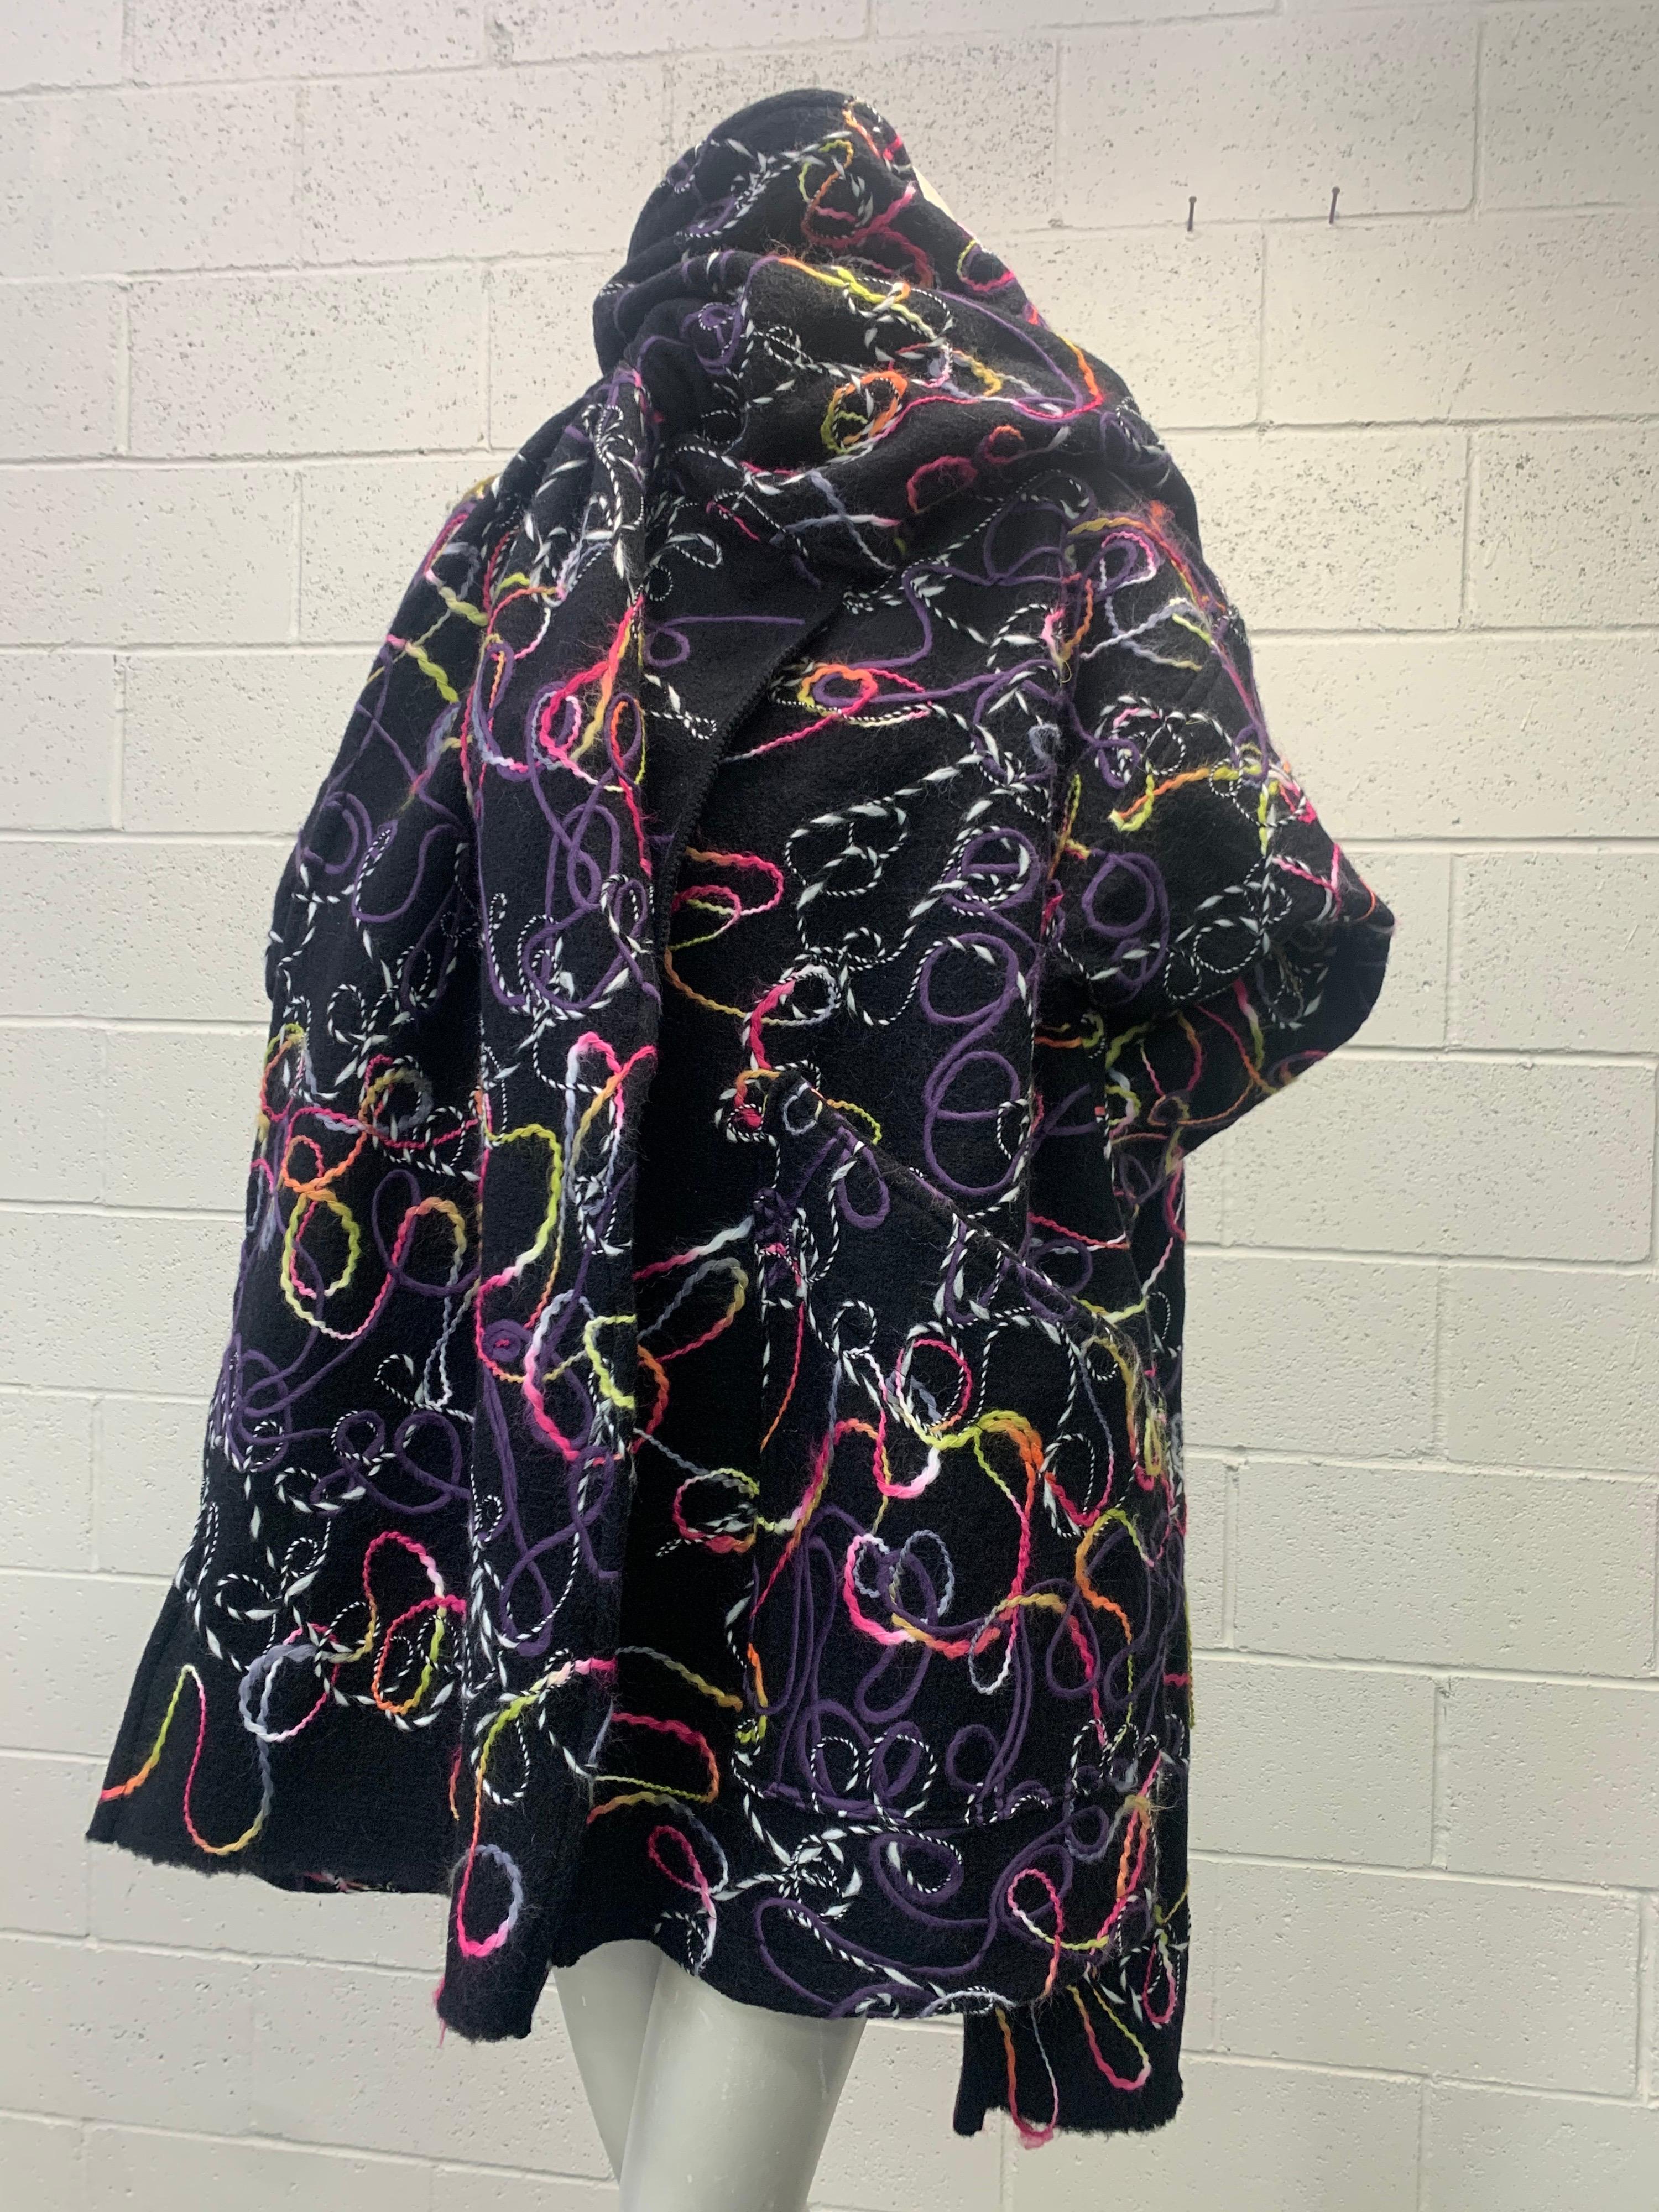 Inspired by the 80's style Torso Creations masterfully designs this over-sized coat from deadstock fabric made in Italy. This heavy felted wool fabric features swirls of vibrant colored woven yarns in pink, lavender, yellow and orange.
 
This coat